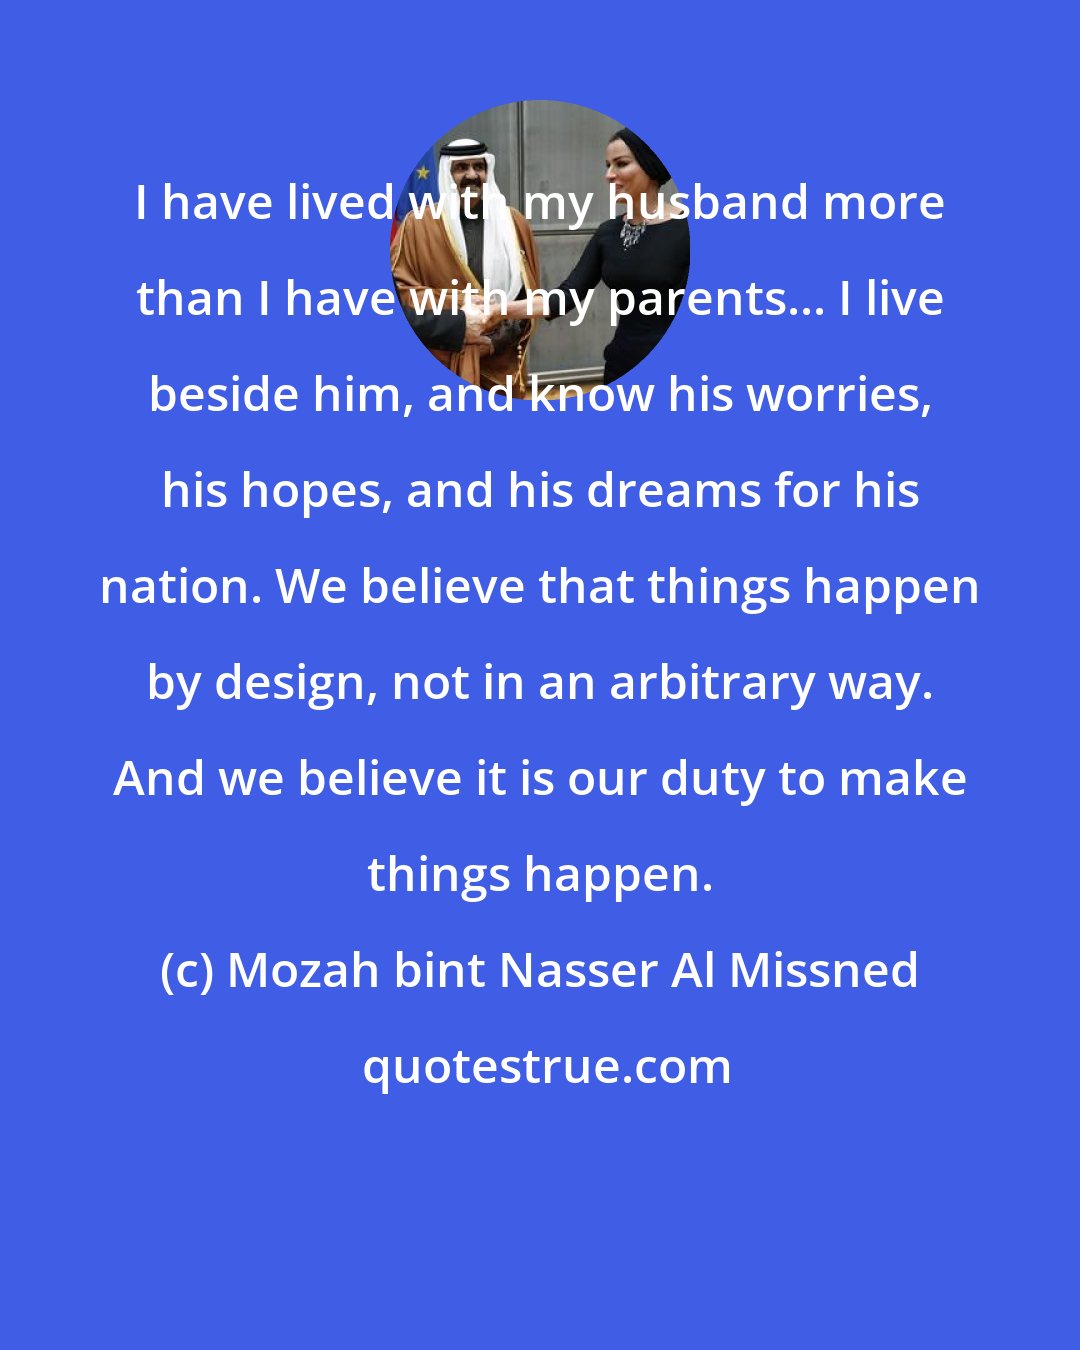 Mozah bint Nasser Al Missned: I have lived with my husband more than I have with my parents... I live beside him, and know his worries, his hopes, and his dreams for his nation. We believe that things happen by design, not in an arbitrary way. And we believe it is our duty to make things happen.